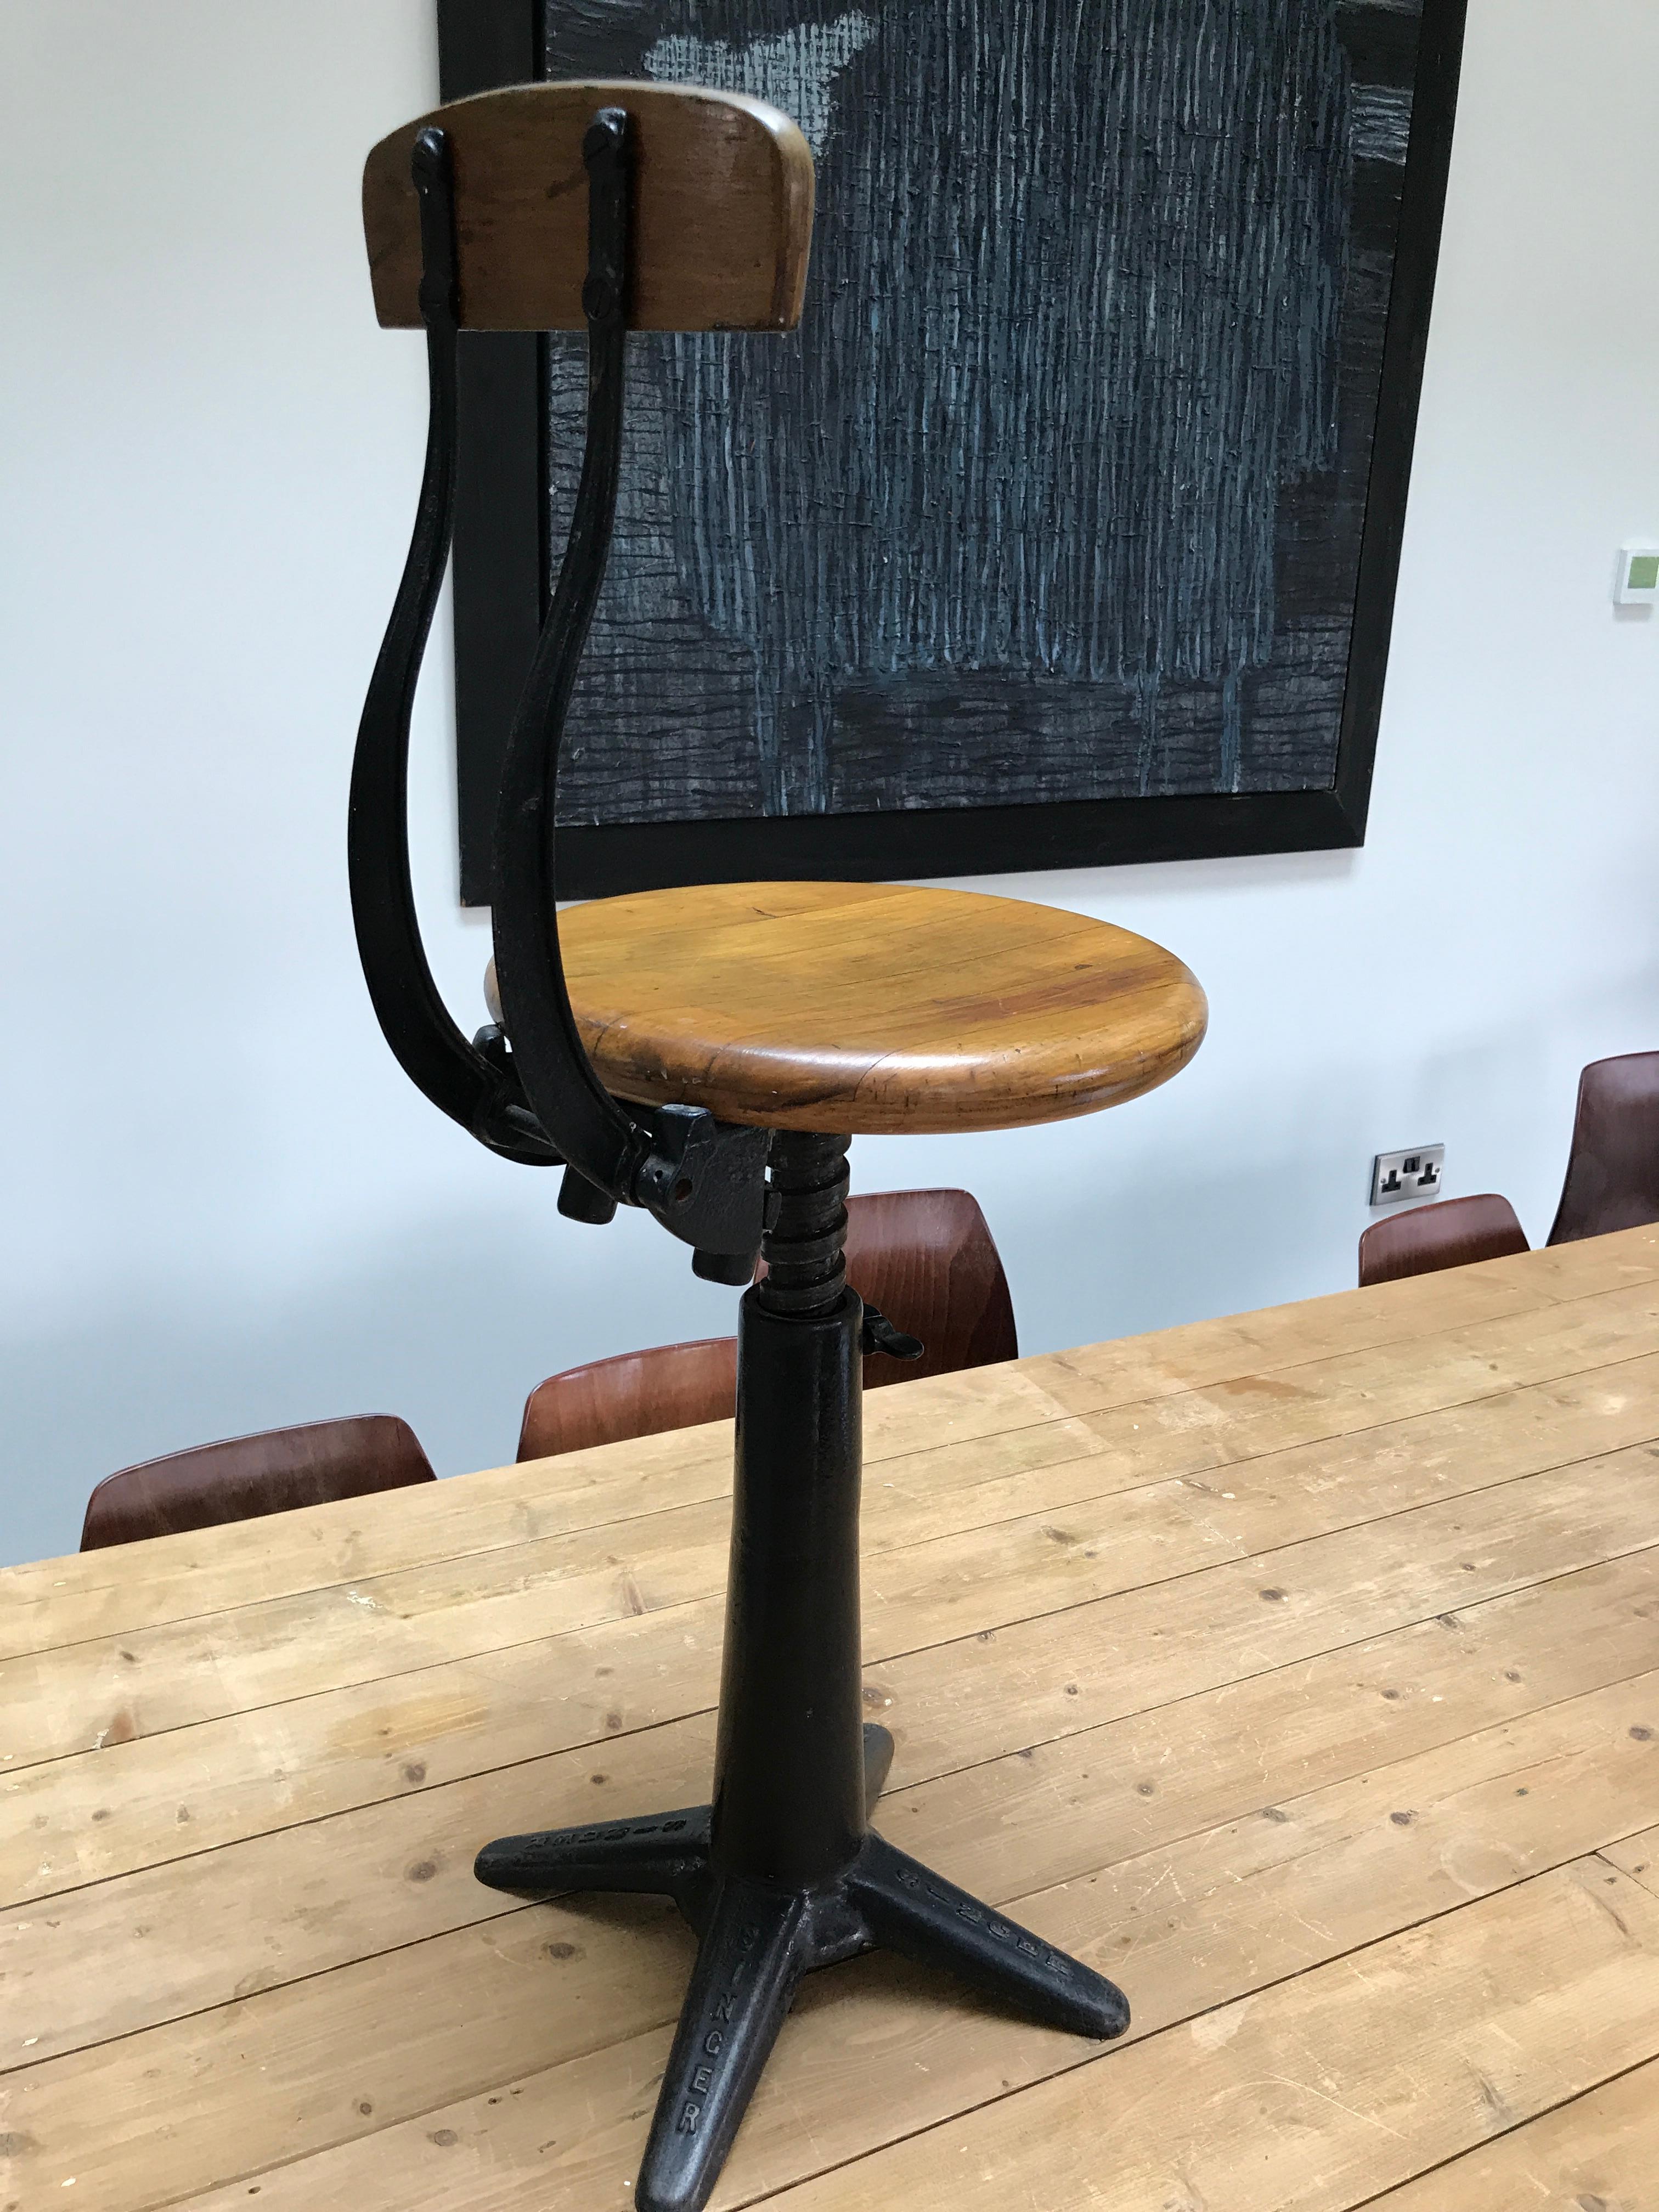 Exceptional quality cast iron Singer industrial stool with back rest original condition

Fully height adjustable, seat between 45 and 64cm (18-25.5 inch) the backrest is sprung by two springs

Measurements are Seat height between 45-64cm,